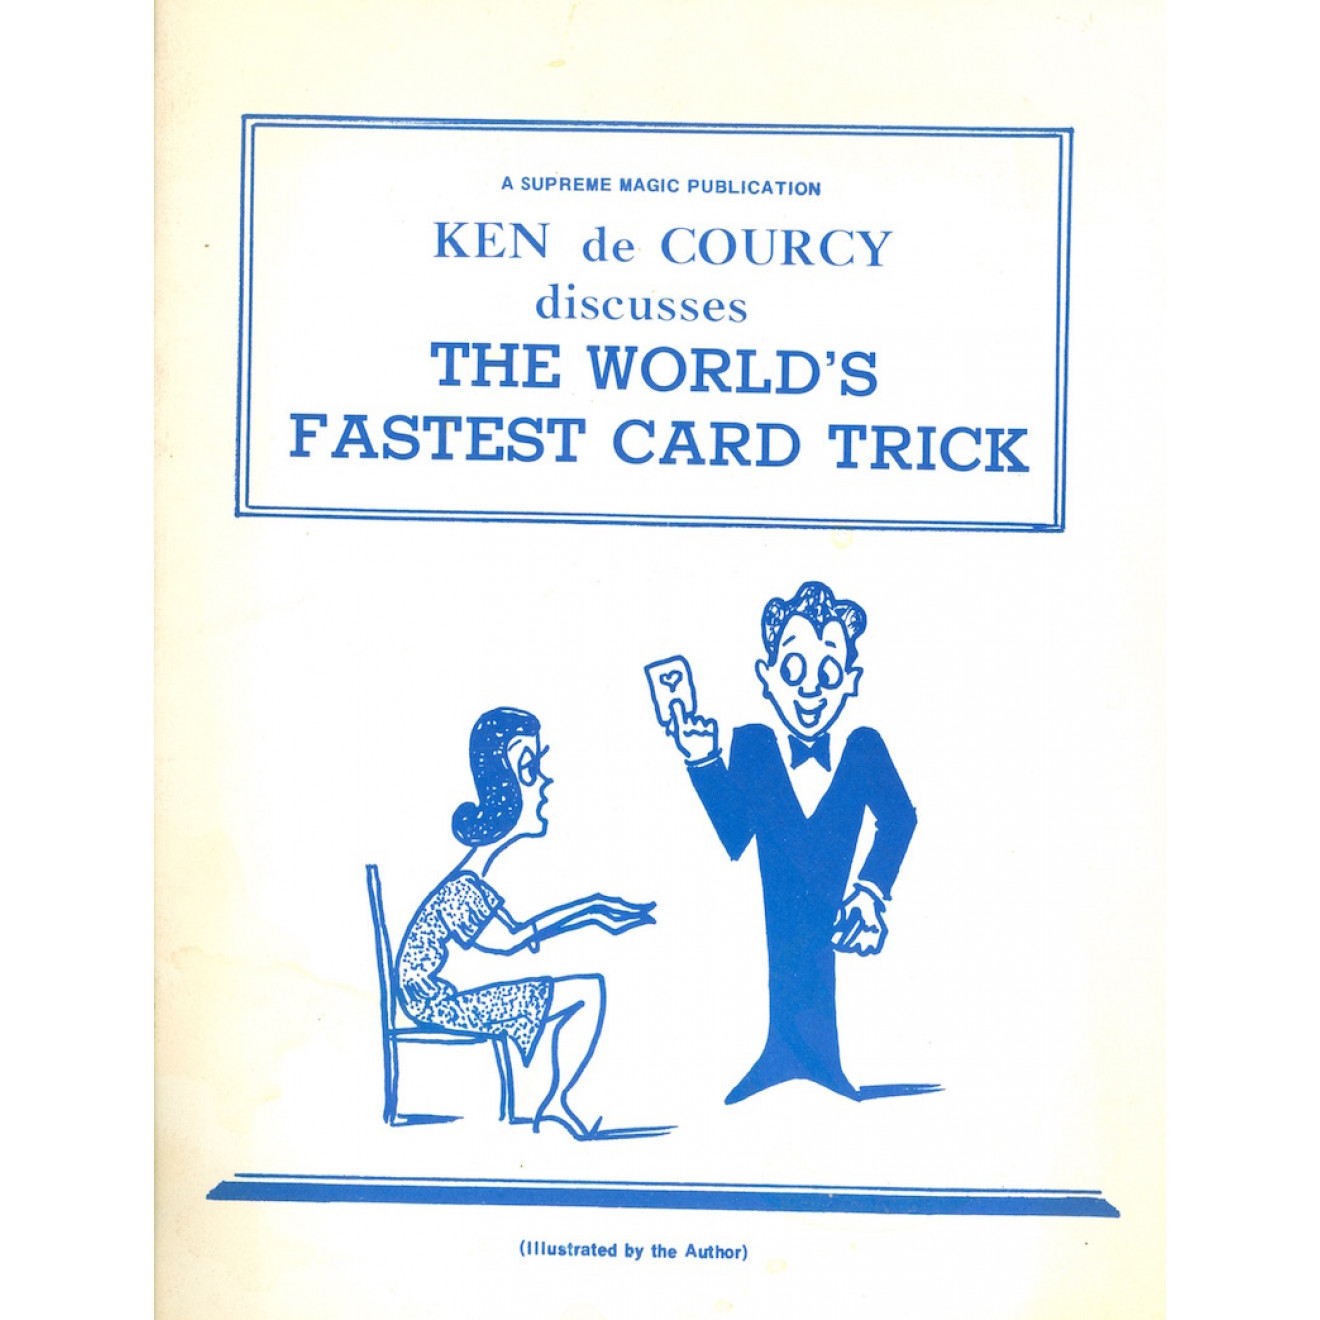 The World's Fastest Card Trick